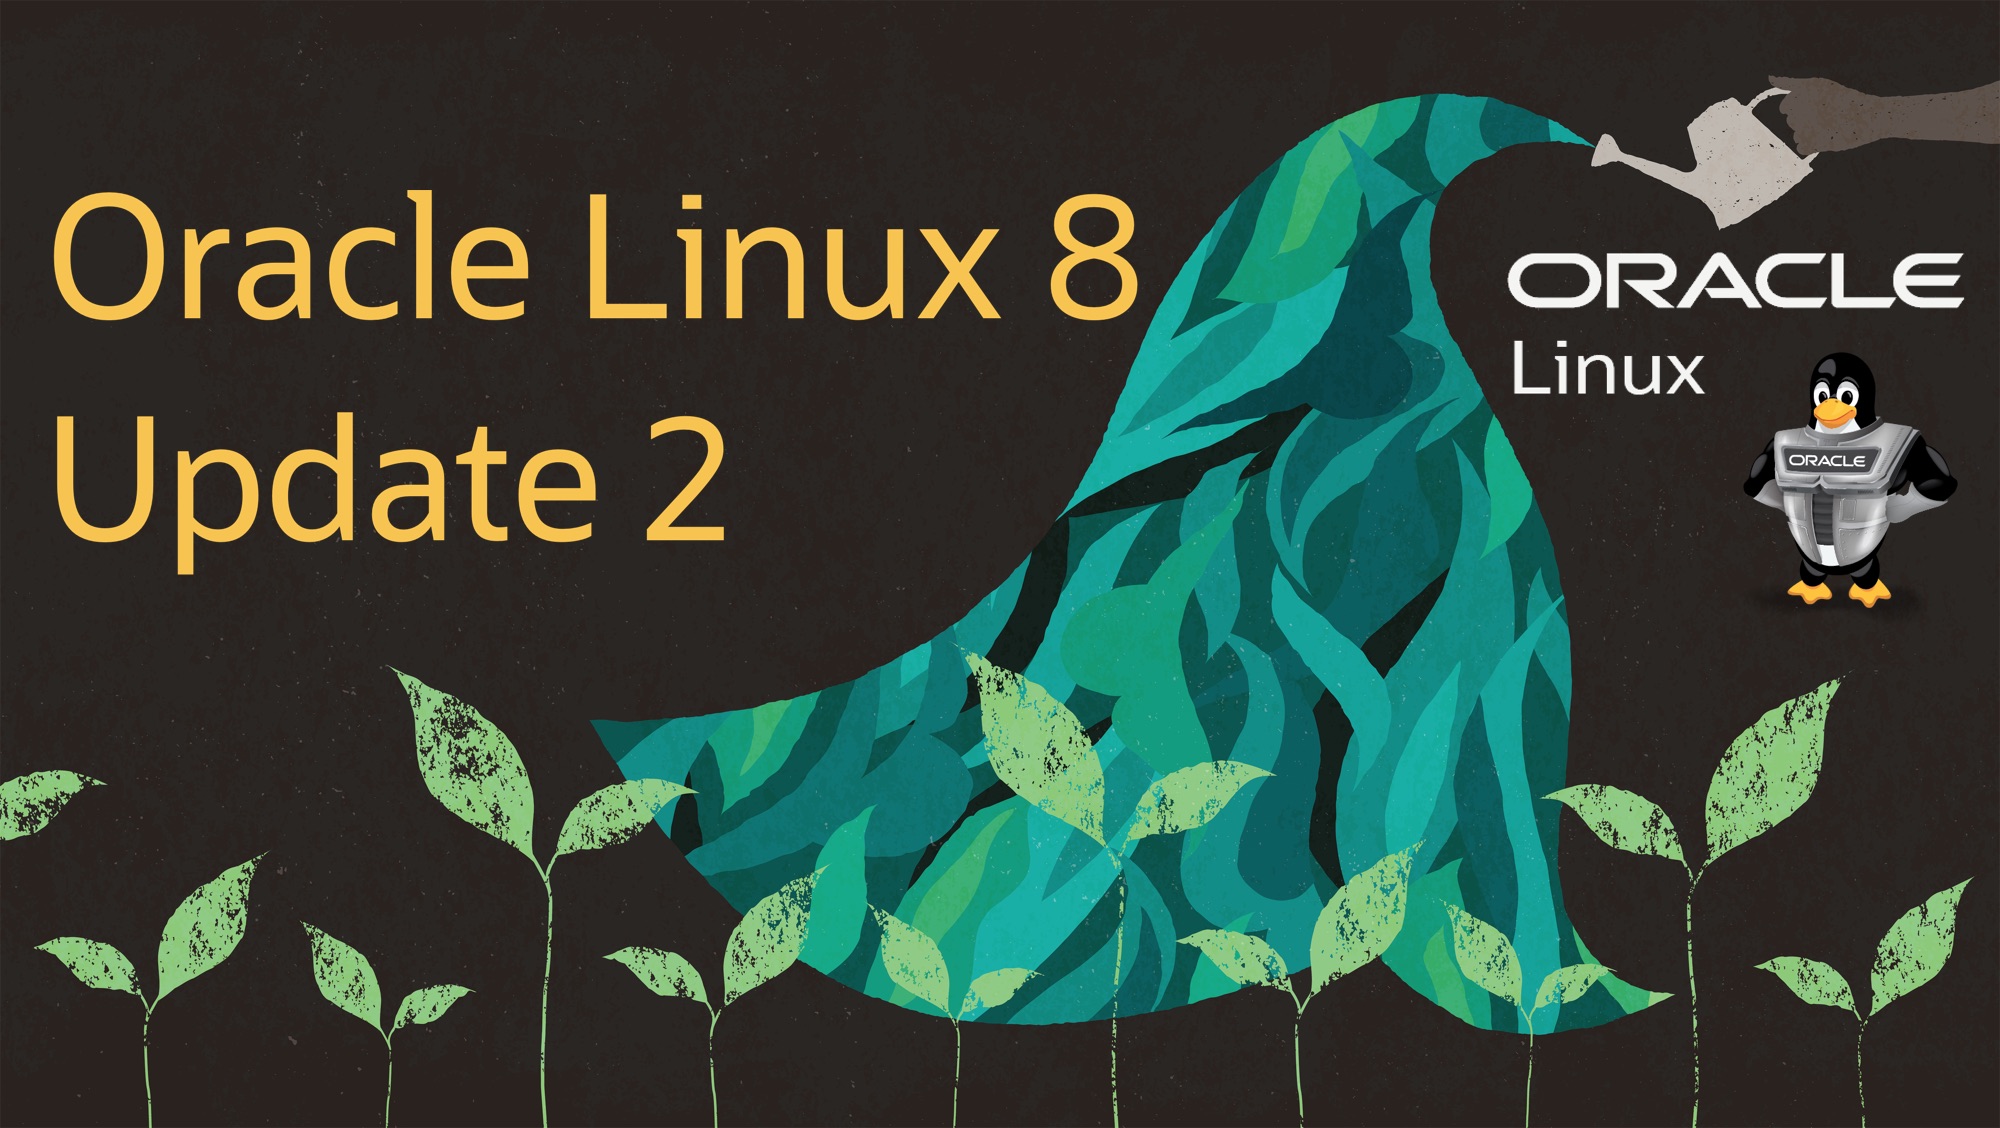 Oracle Linux 8.2 Released, It’s Based on Red Hat Enterprise Linux 8.2